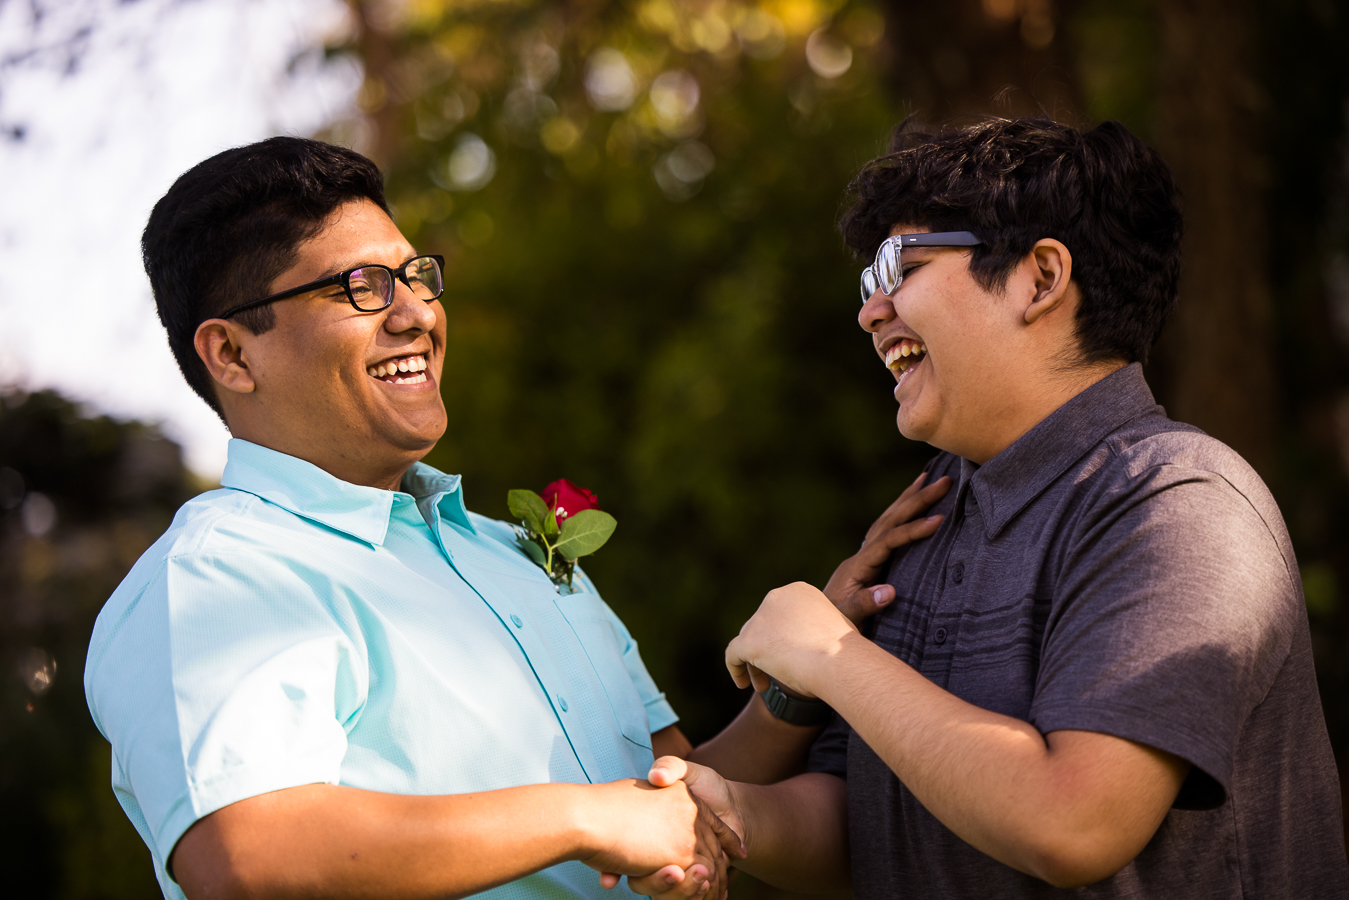 candid maryland wedding photographer, lisa rhinehart, captures this image of the groom with his younger brother as they shake hands and laugh during this intimate wedding ceremony 